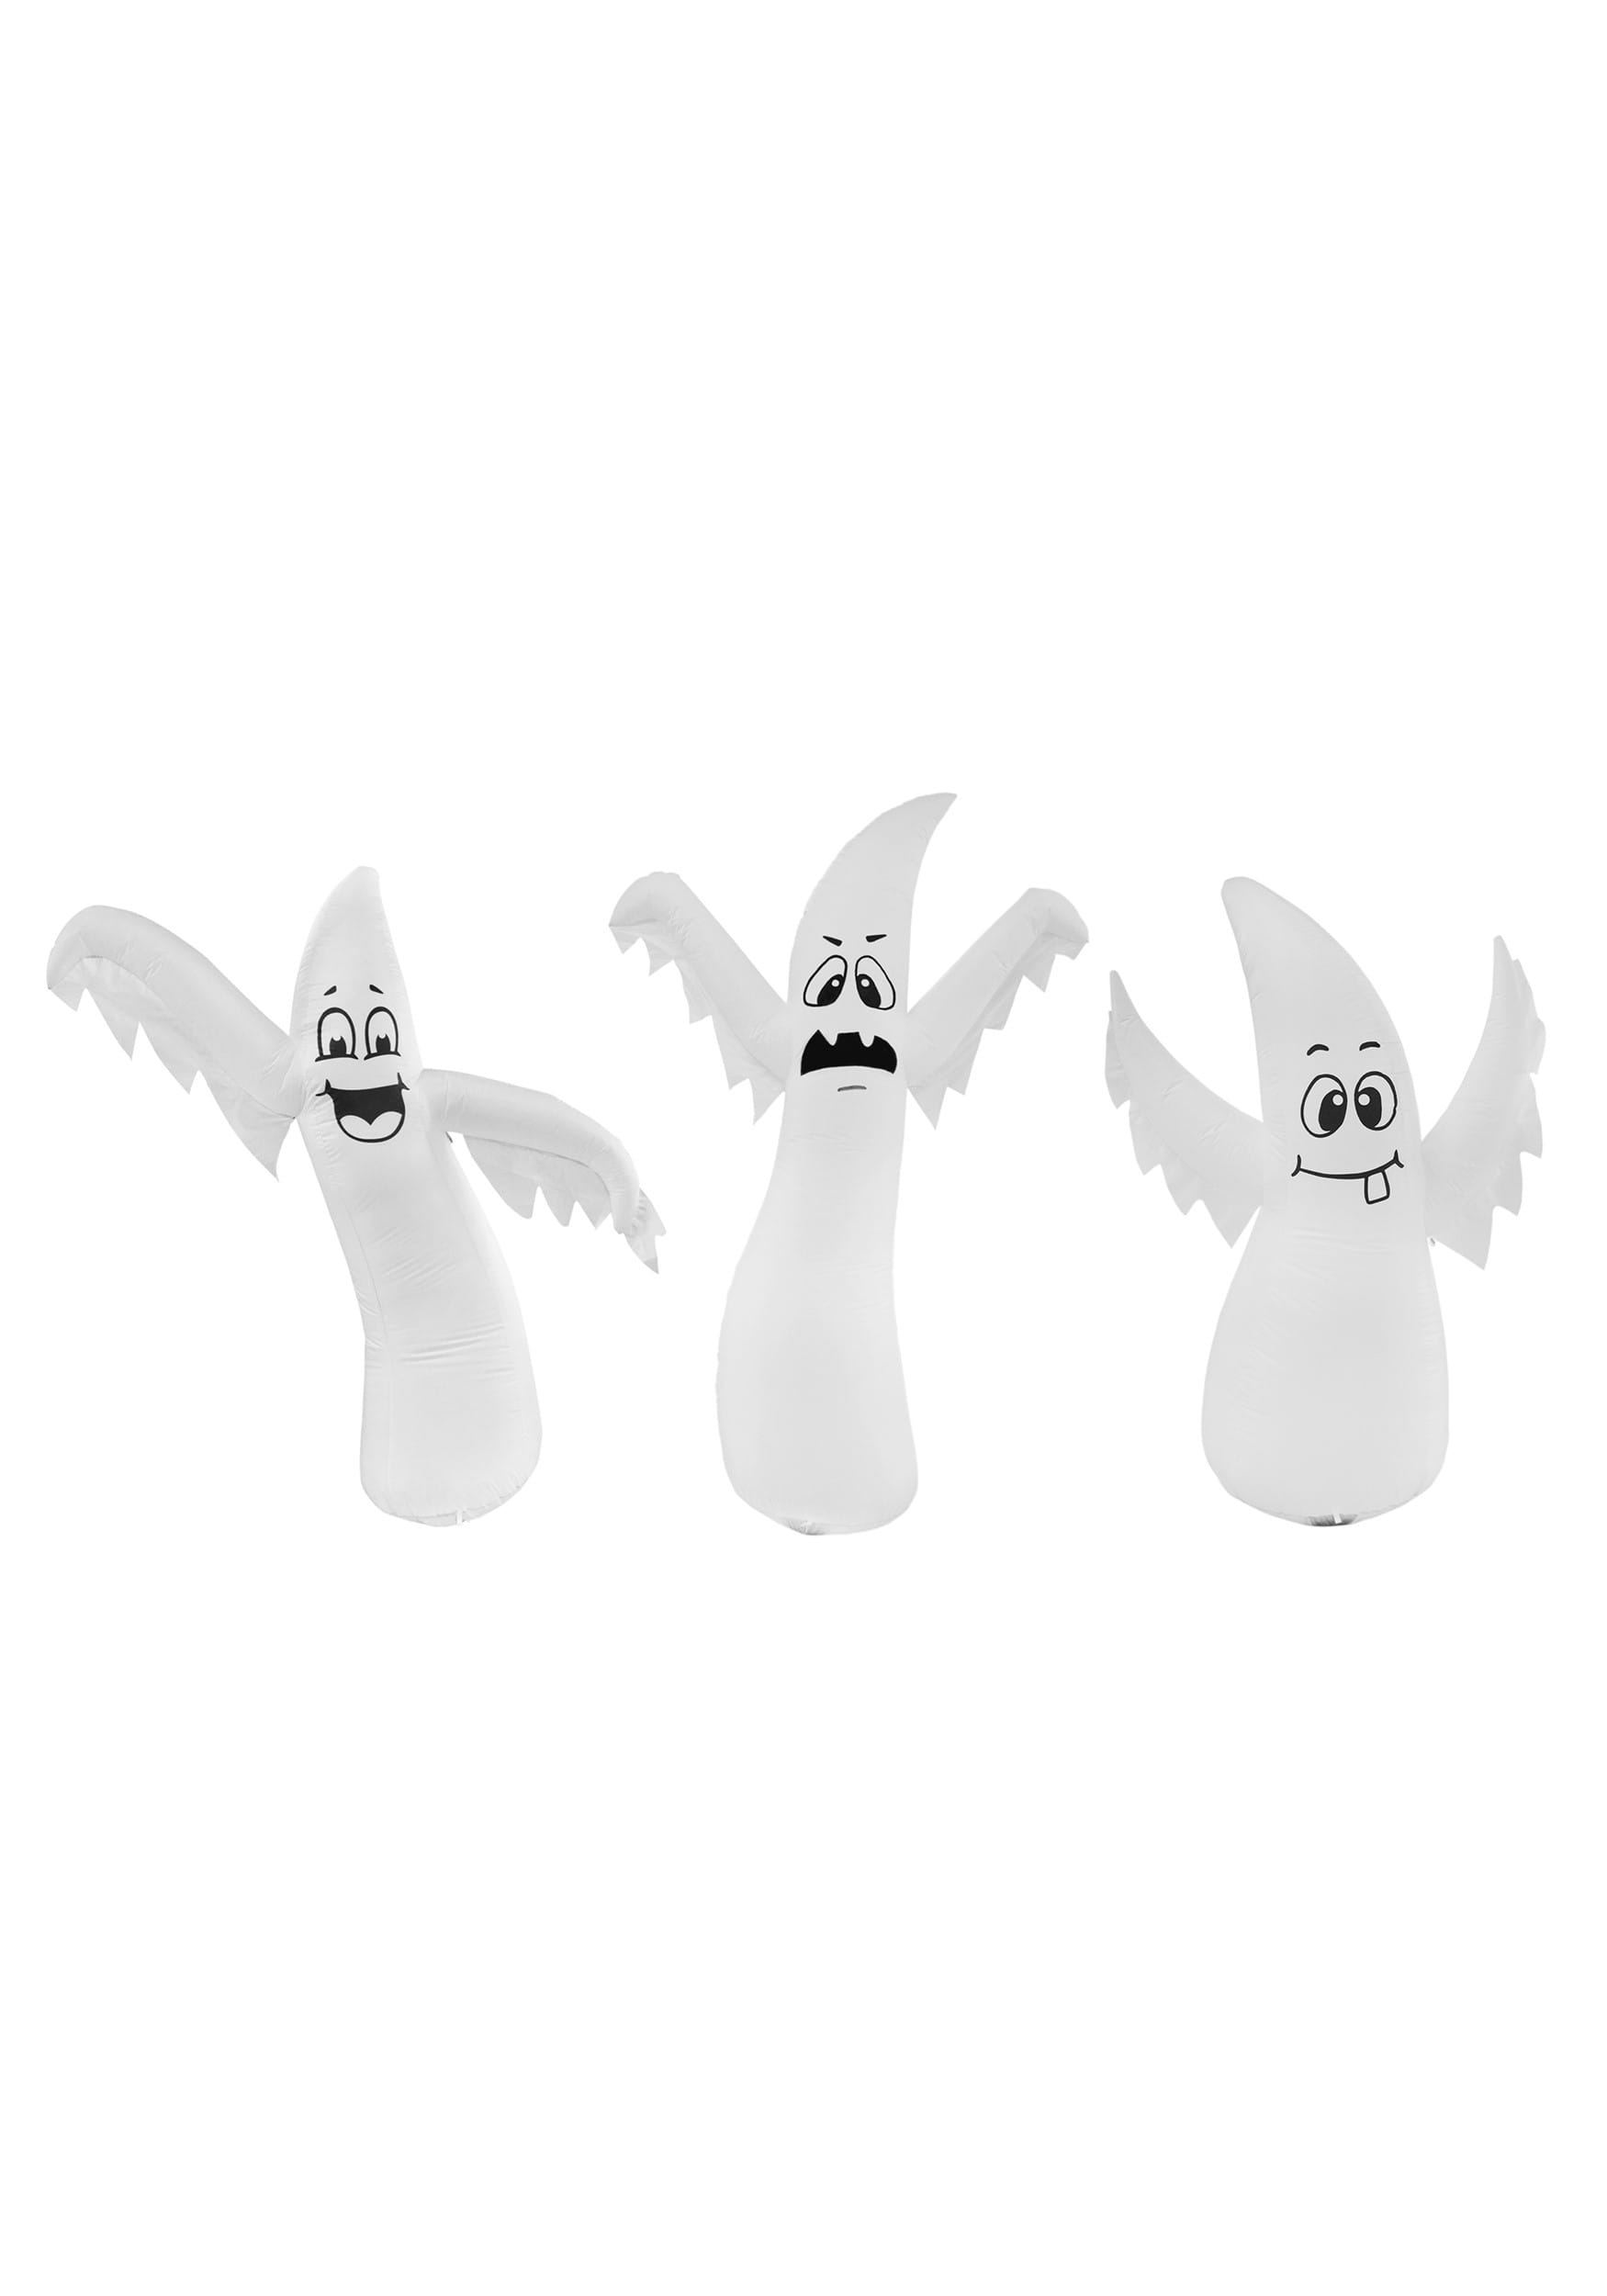 Small, Medium, & Large 3 Pack Of Dancing Ghosts Inflatable Decoration